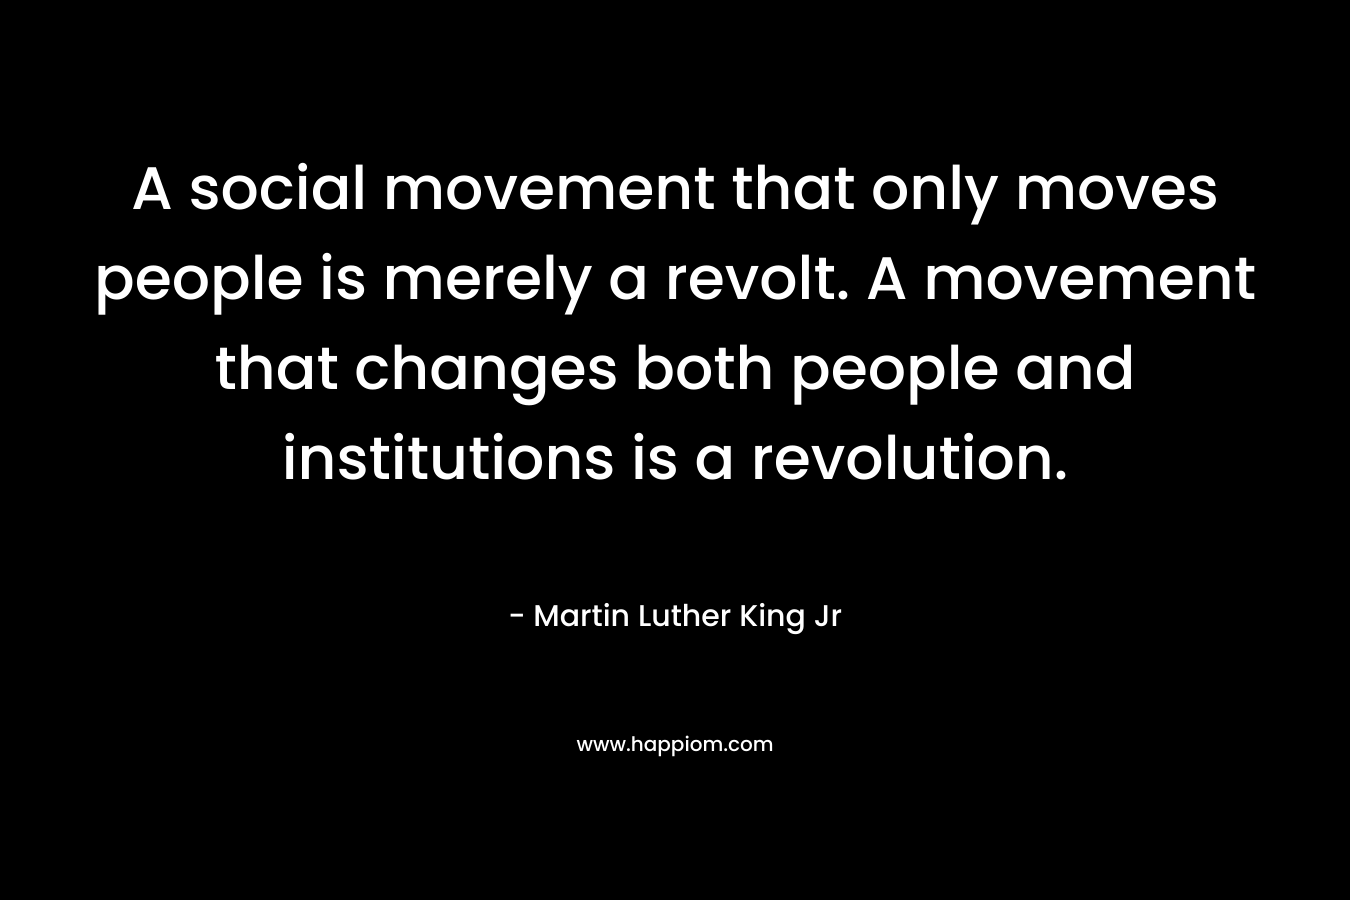 A social movement that only moves people is merely a revolt. A movement that changes both people and institutions is a revolution. – Martin Luther King Jr